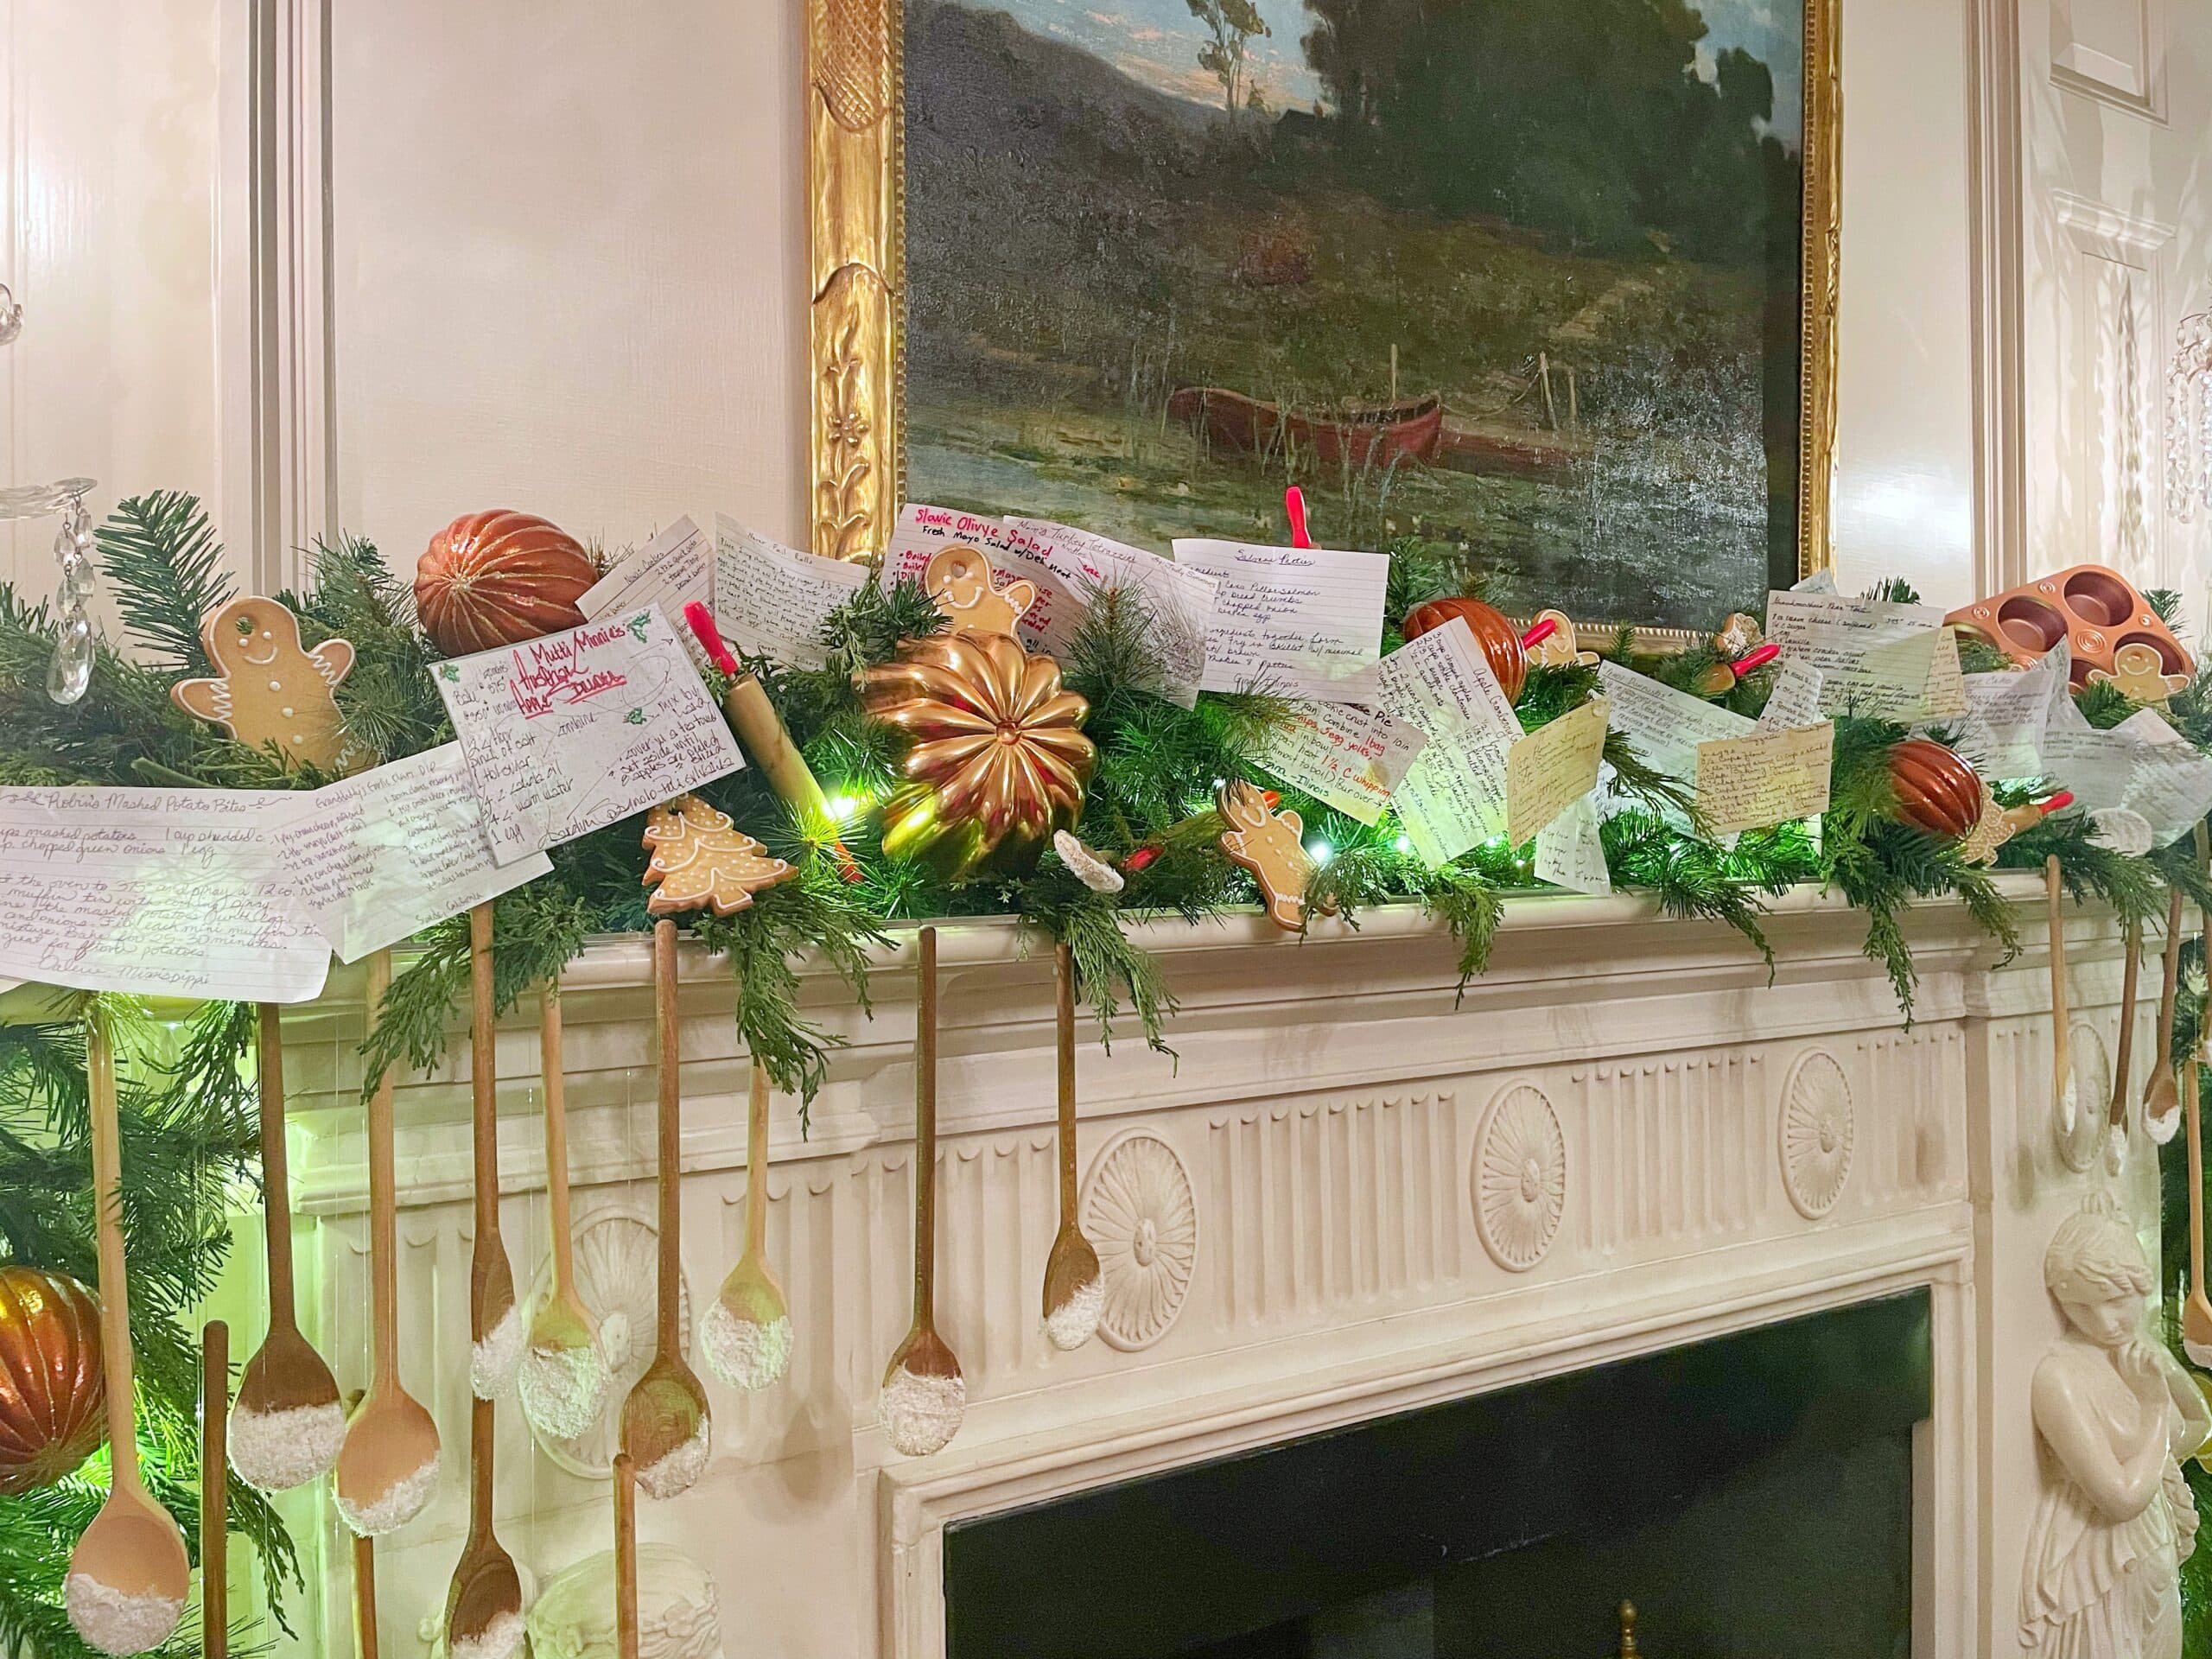 DIY recipe card garland and other food and cooking related Christmas decorations on the mantel of the White House China Room as part of the 2022 holiday decorations